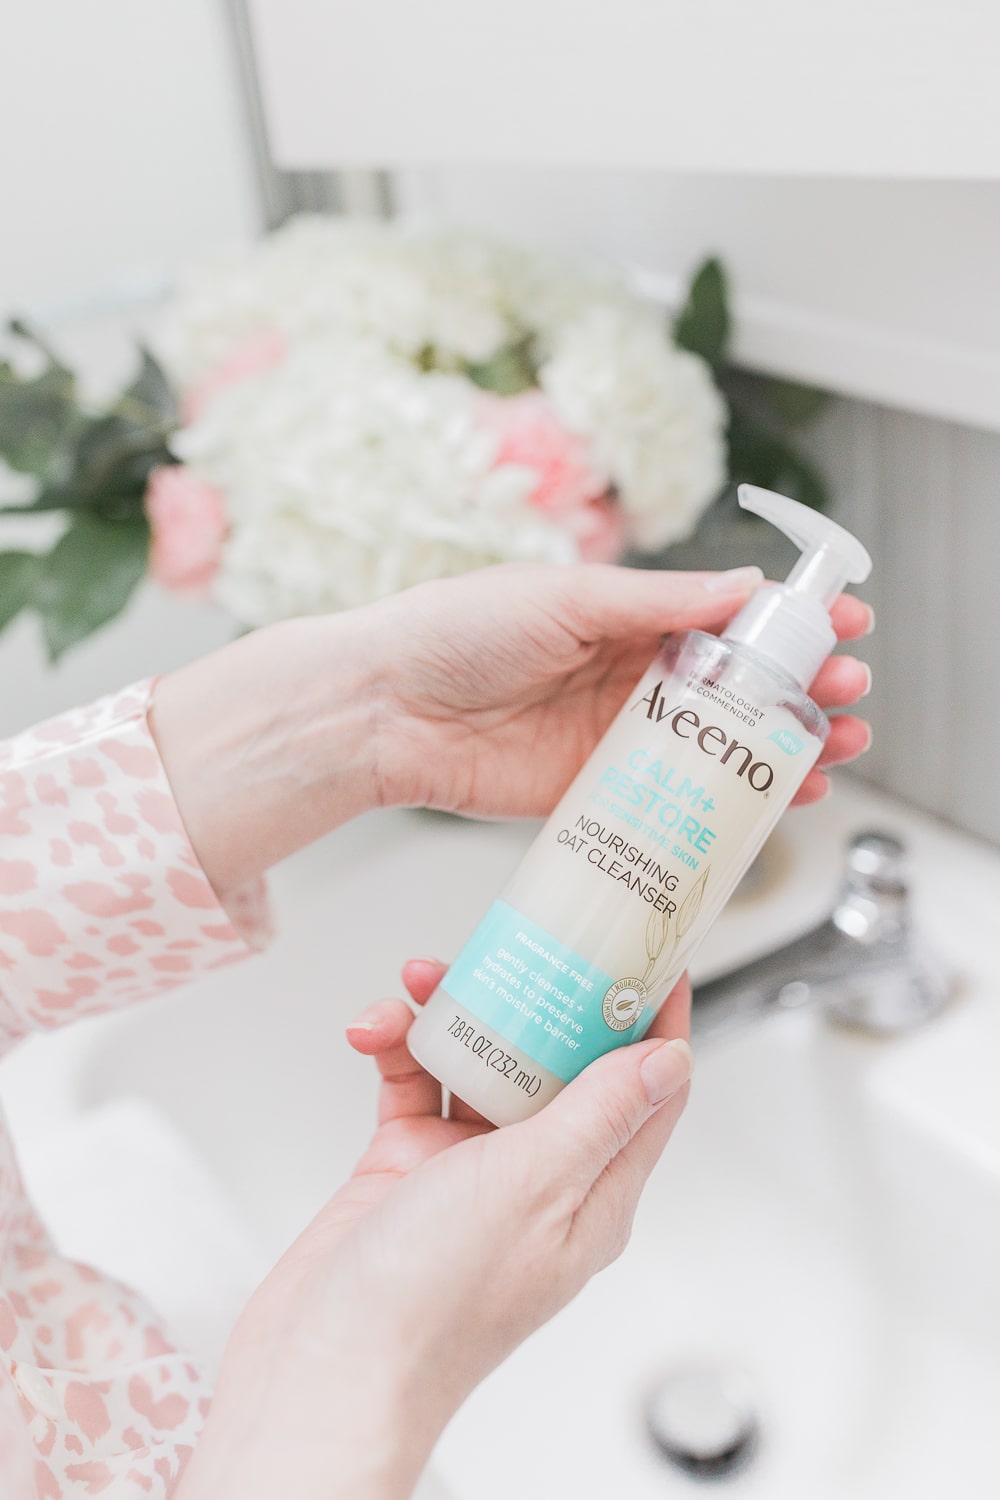 Aveeno Calm and Restore cleanser review for women with sensitive skin by blogger Stephanie Ziajka on Diary of a Debutante